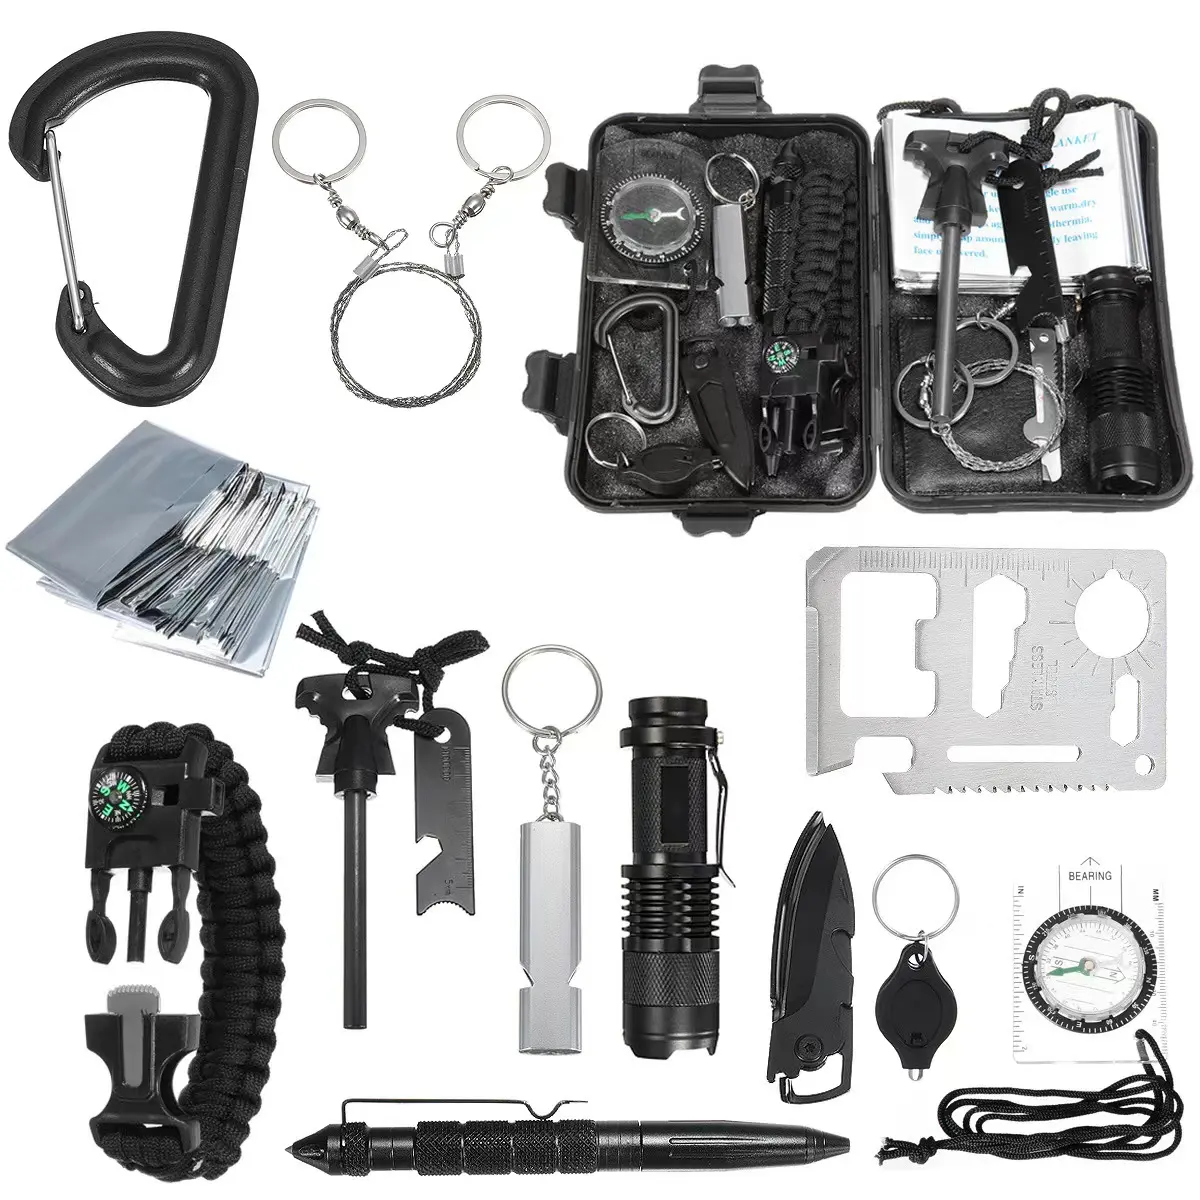 Camping 13 in 1 survival kit Set Outdoor SOS Camping equipment Travel Multifunction First aid Emergency survival kit